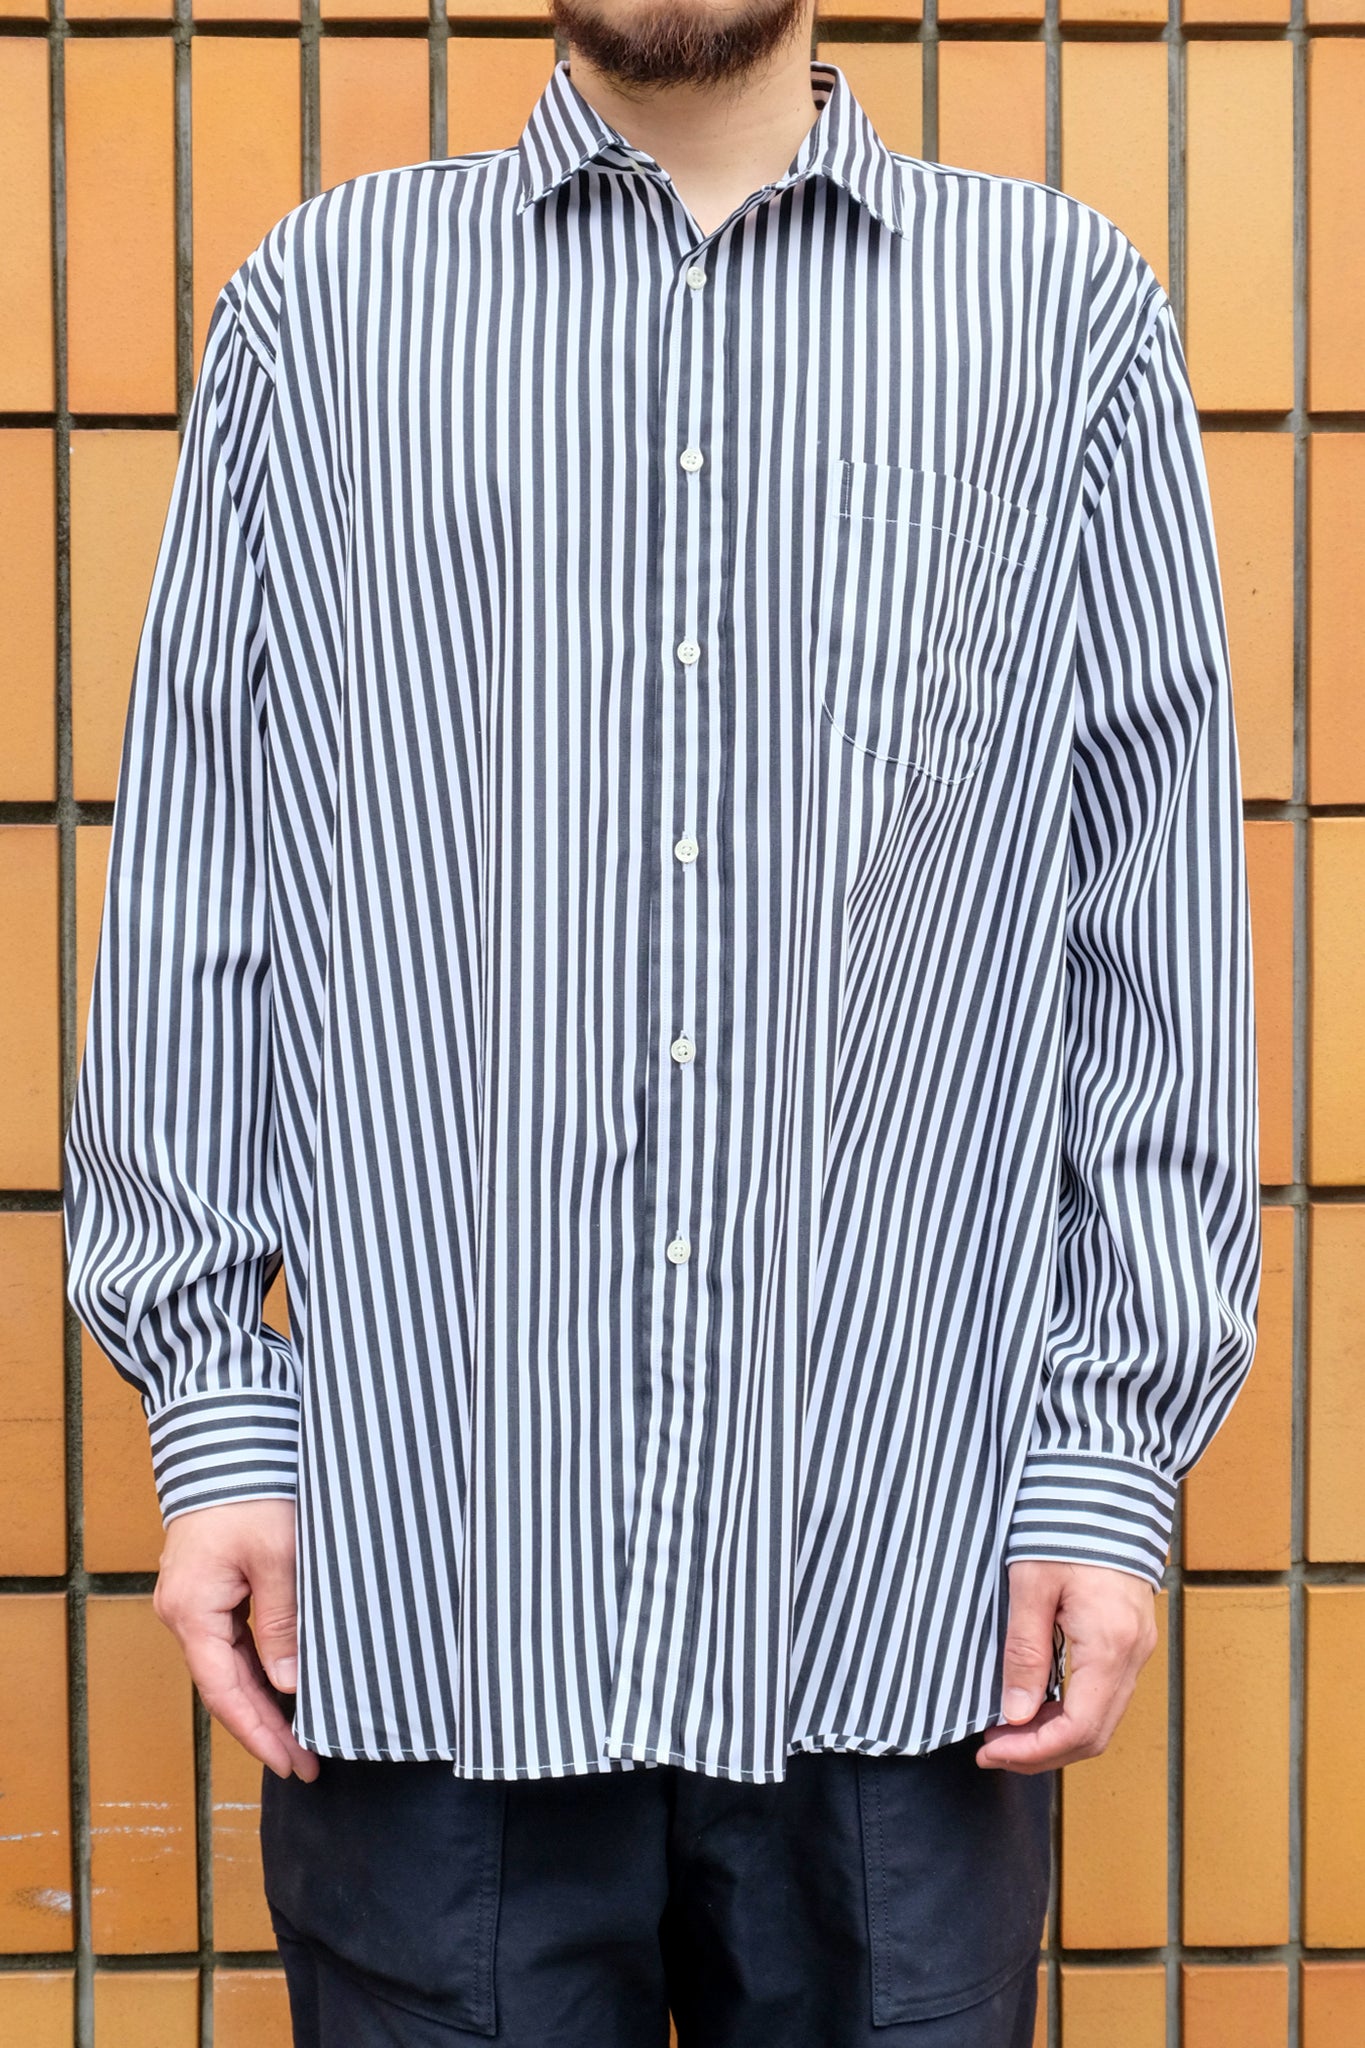 INDIVIDUALIZED SHIRTS "【LOCALERS EXCLUSIVE】BARBER STRIPE LONG SLEEVE SHIRT"